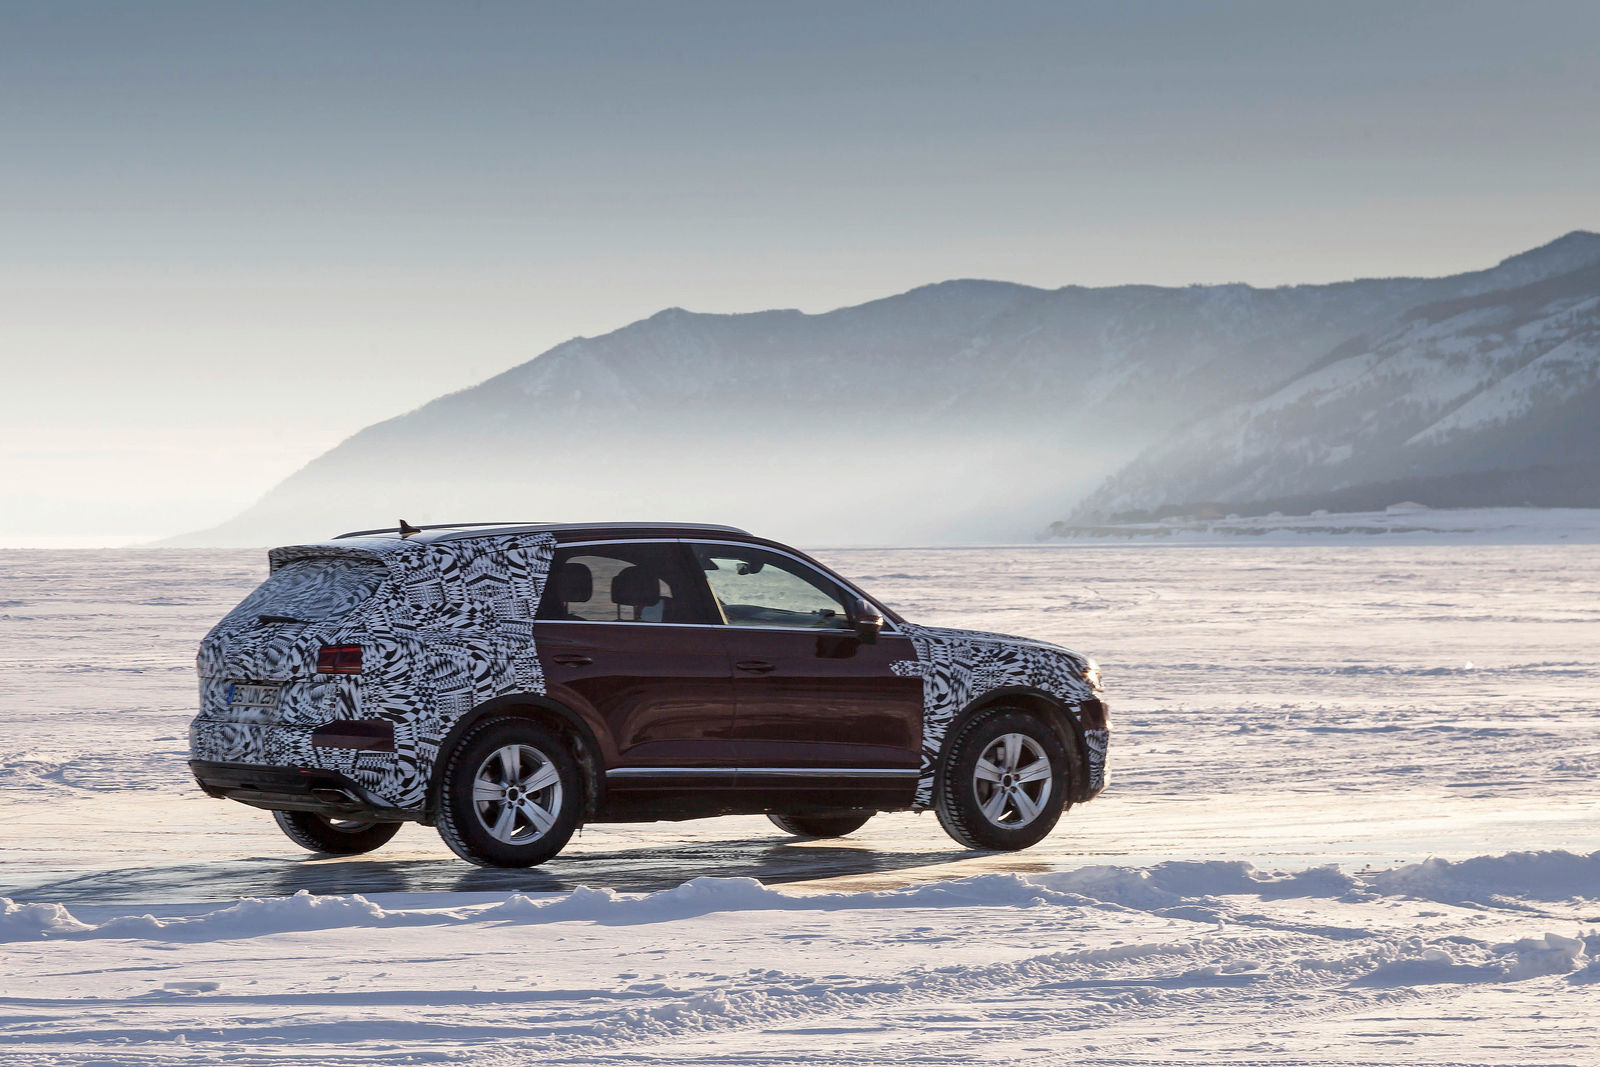 Gala appearance in camouflage: new Volkswagen Touareg drives more than 16,000 km to its own world premiere